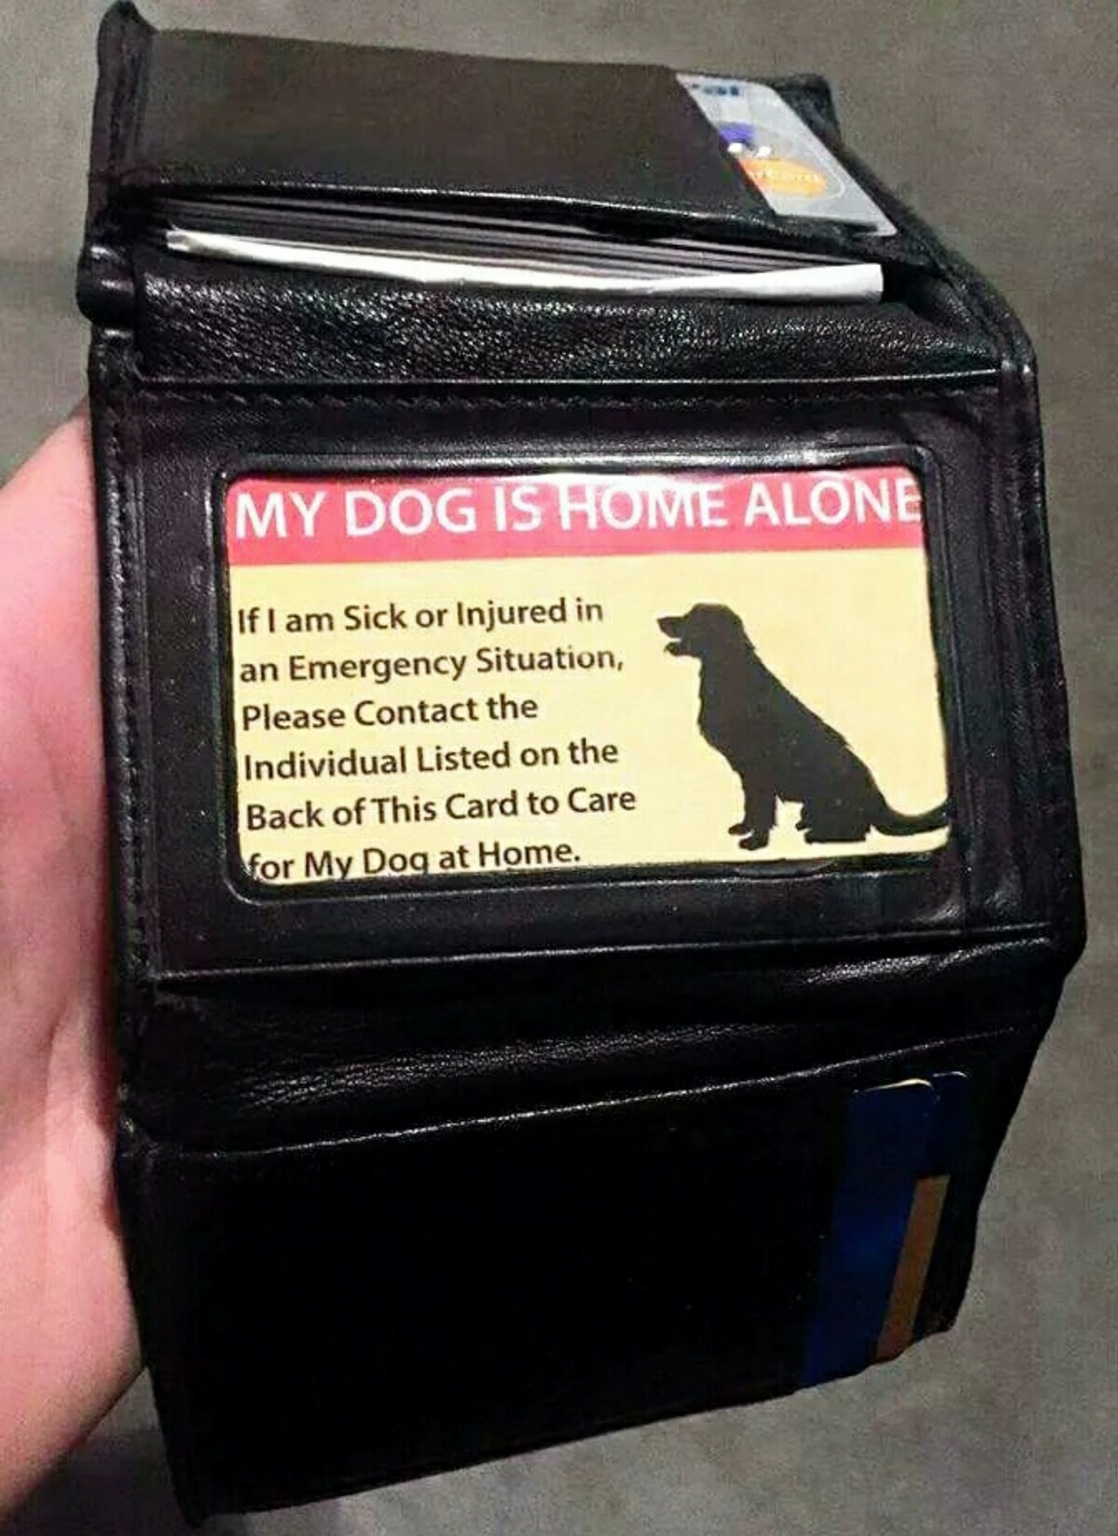 Pet - My Dog Is Home Alone If I am sick or Injured in an Emergency Situation, Please Contact the Individual Listed on the Back of This Card to Care for My Dog at Home.